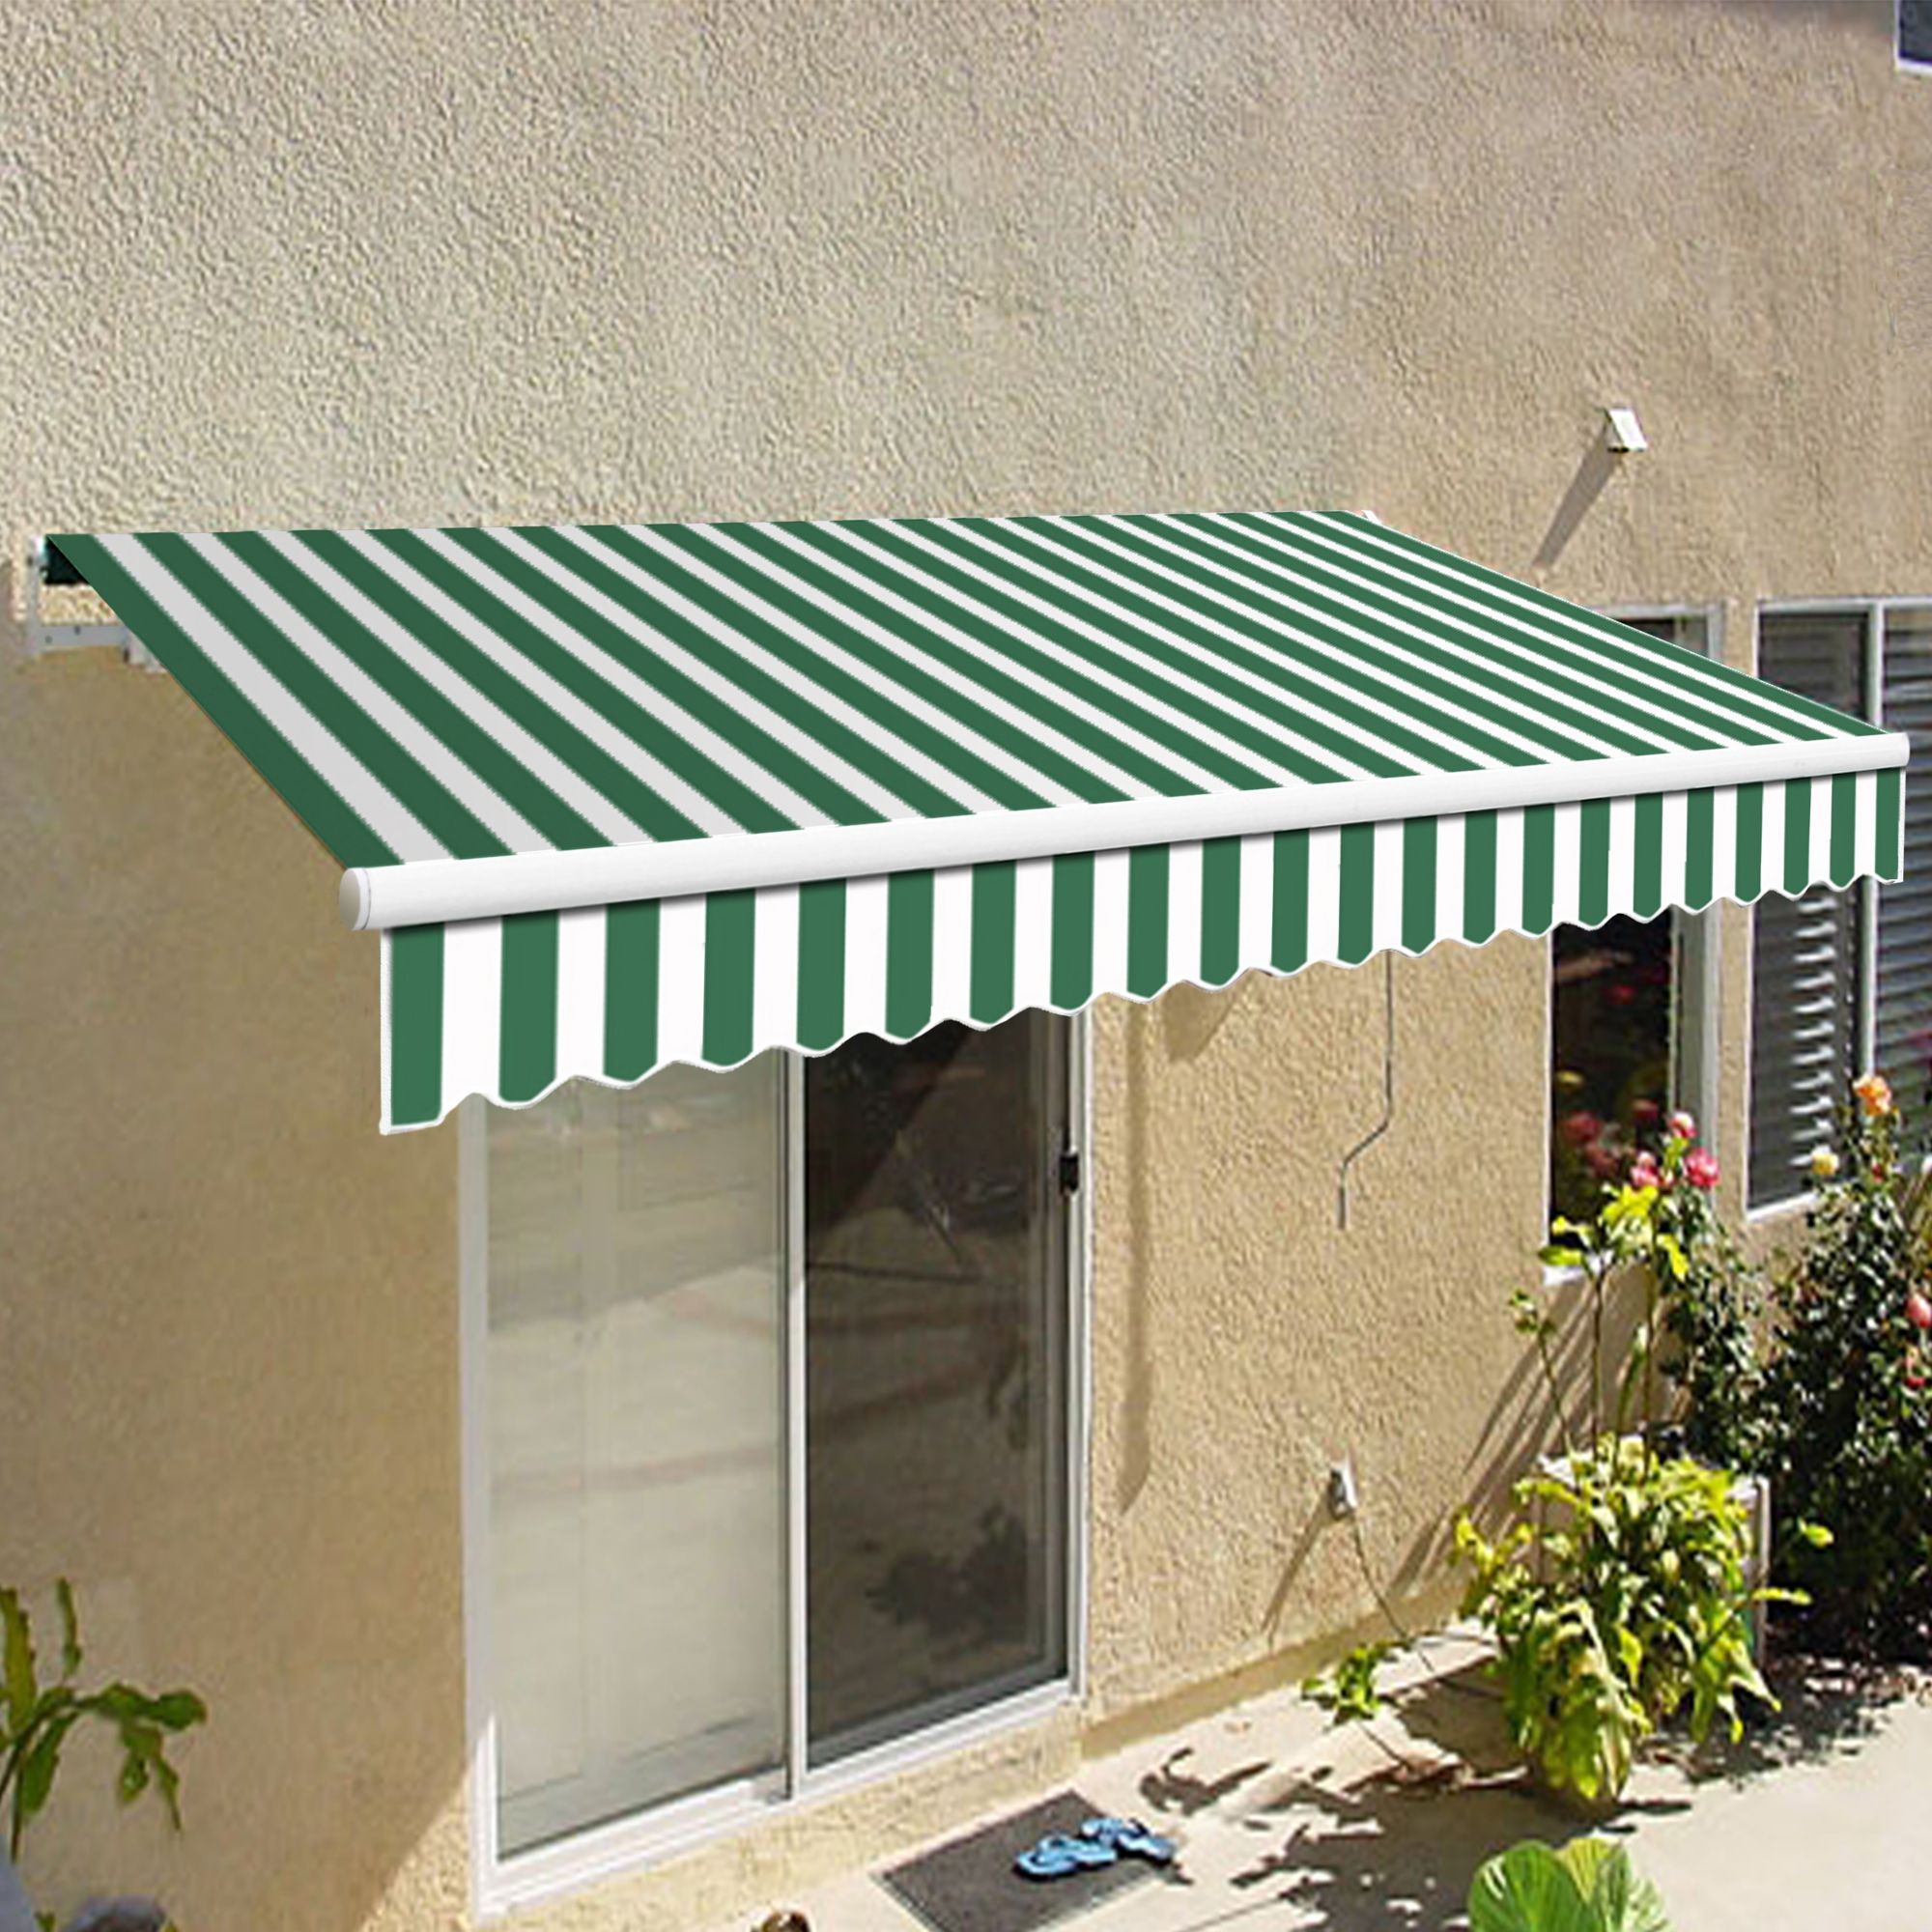 Awntech California 10' Beauty-Mark Manual Patio Awning with 96&quot; Projection - Green